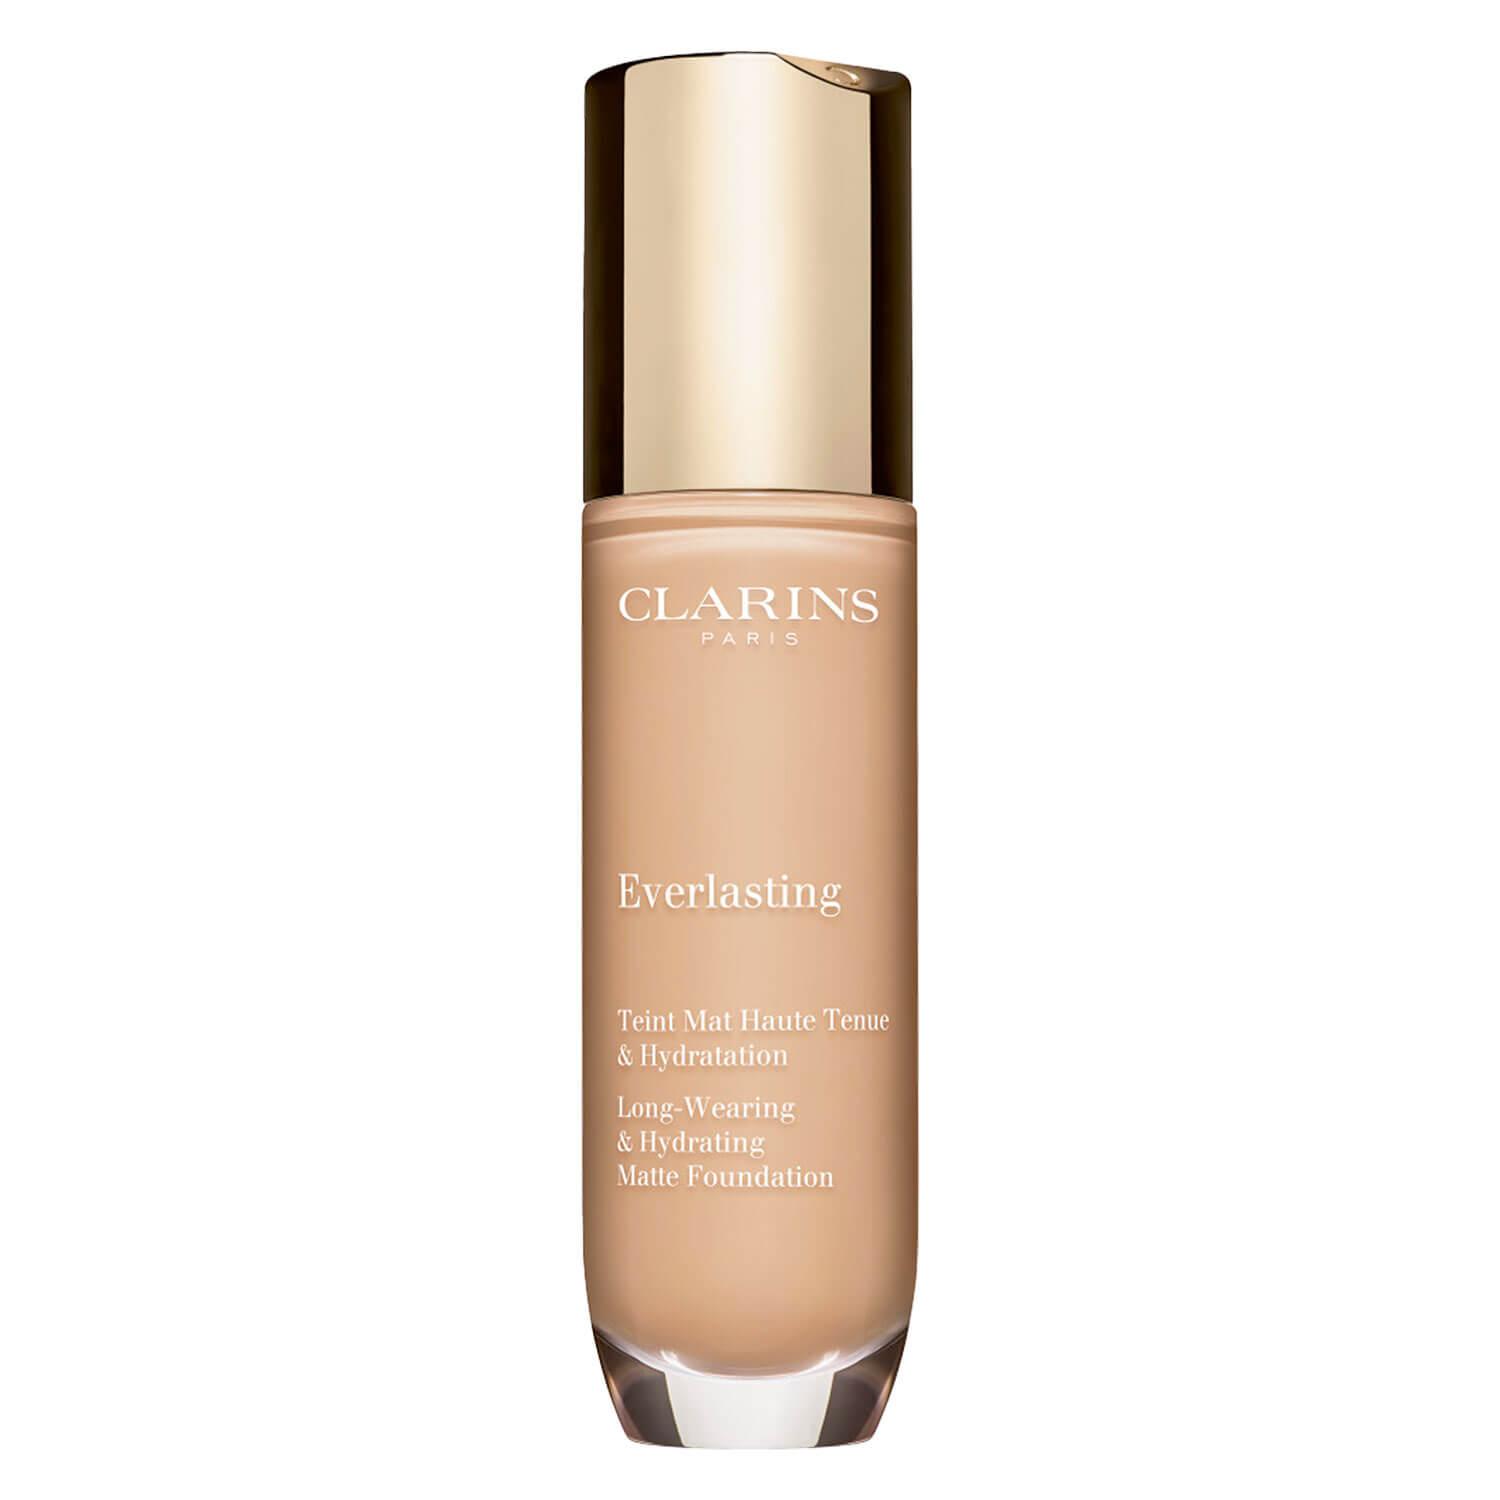 Everlasting - Long-Wearing & Hydrating Matte Foundation 105N Nude